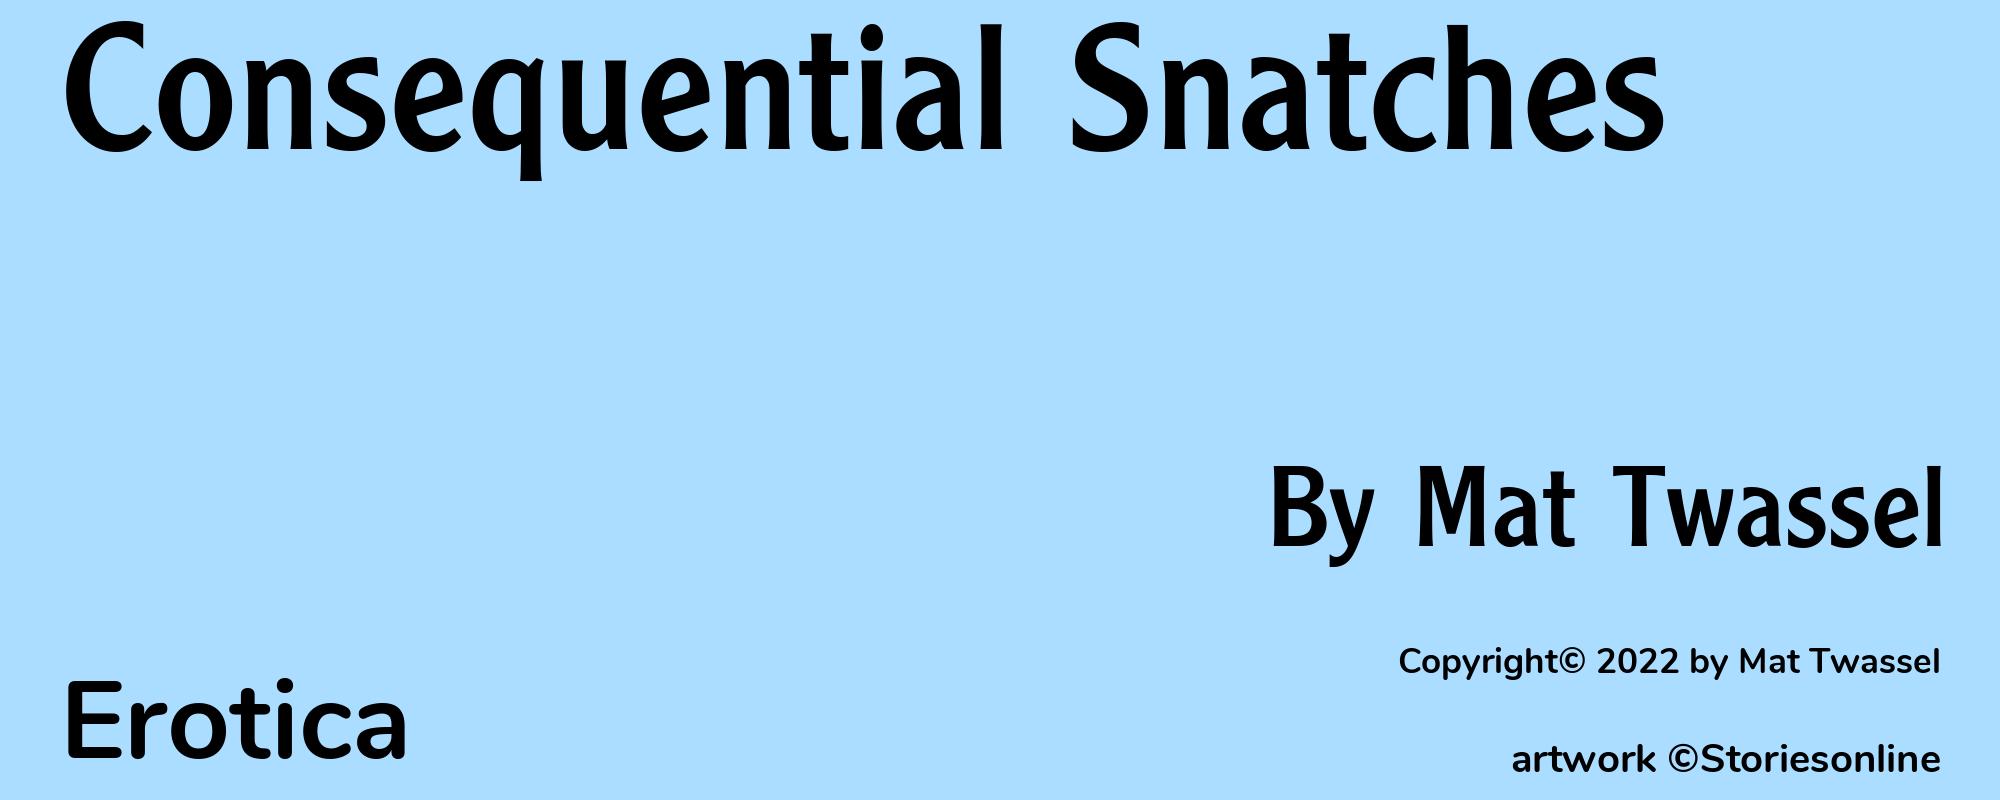 Consequential Snatches - Cover